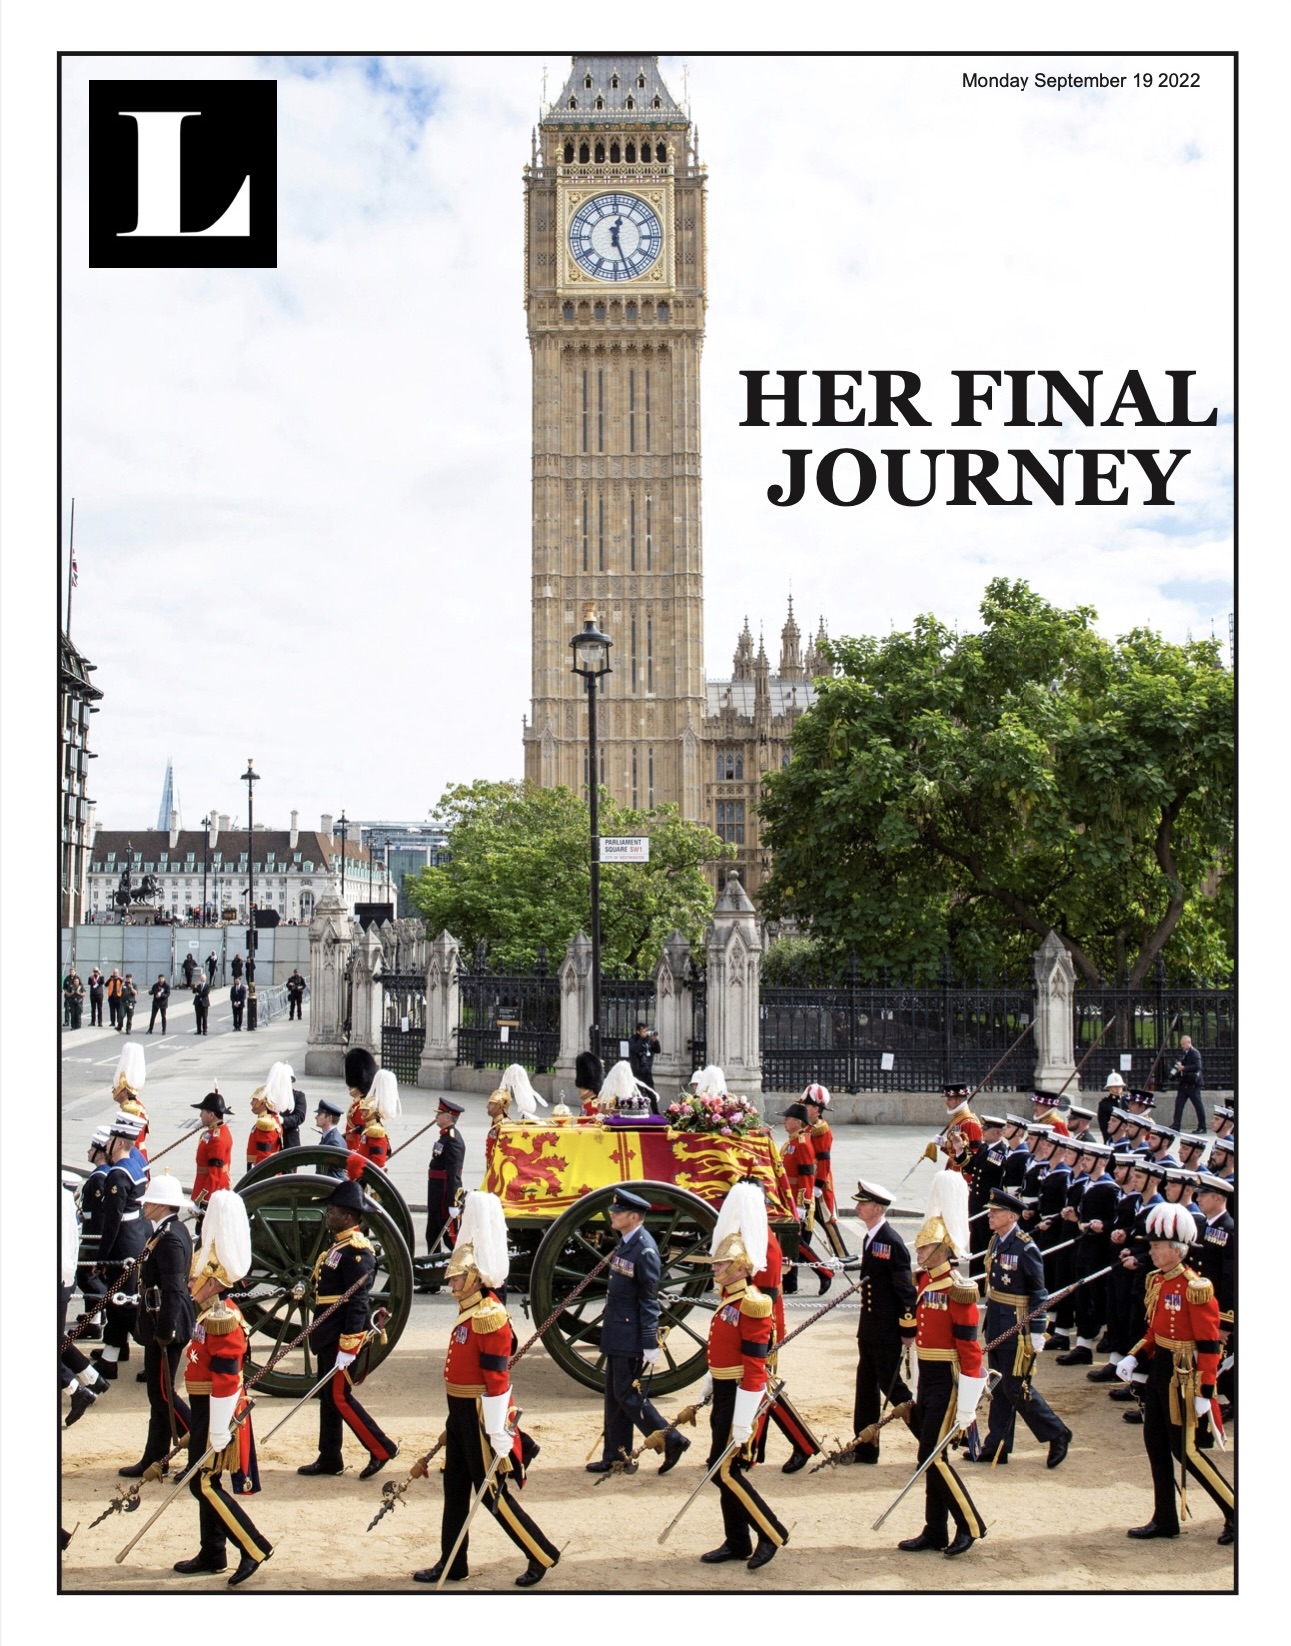 A screen grab from the e-magazine produced by our trainees on the death and funeral of Queen Elizabeth II.